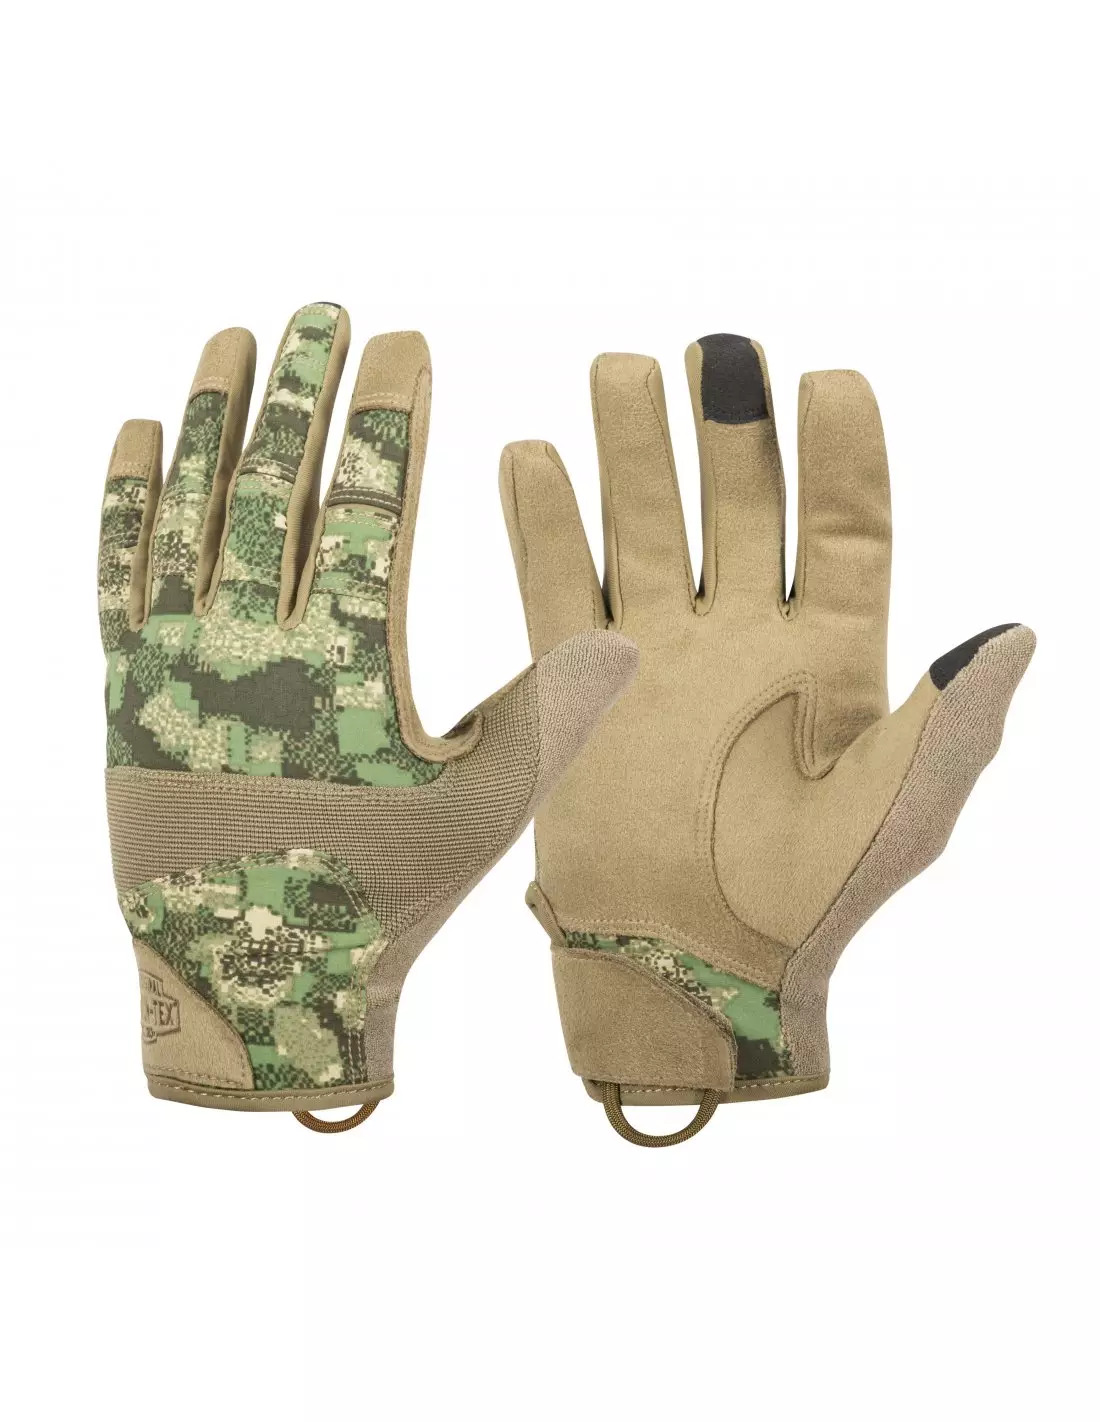 Helikon All Round Tactical Light Gloves Patrol Airsoft Coyote/Adaptive Green 